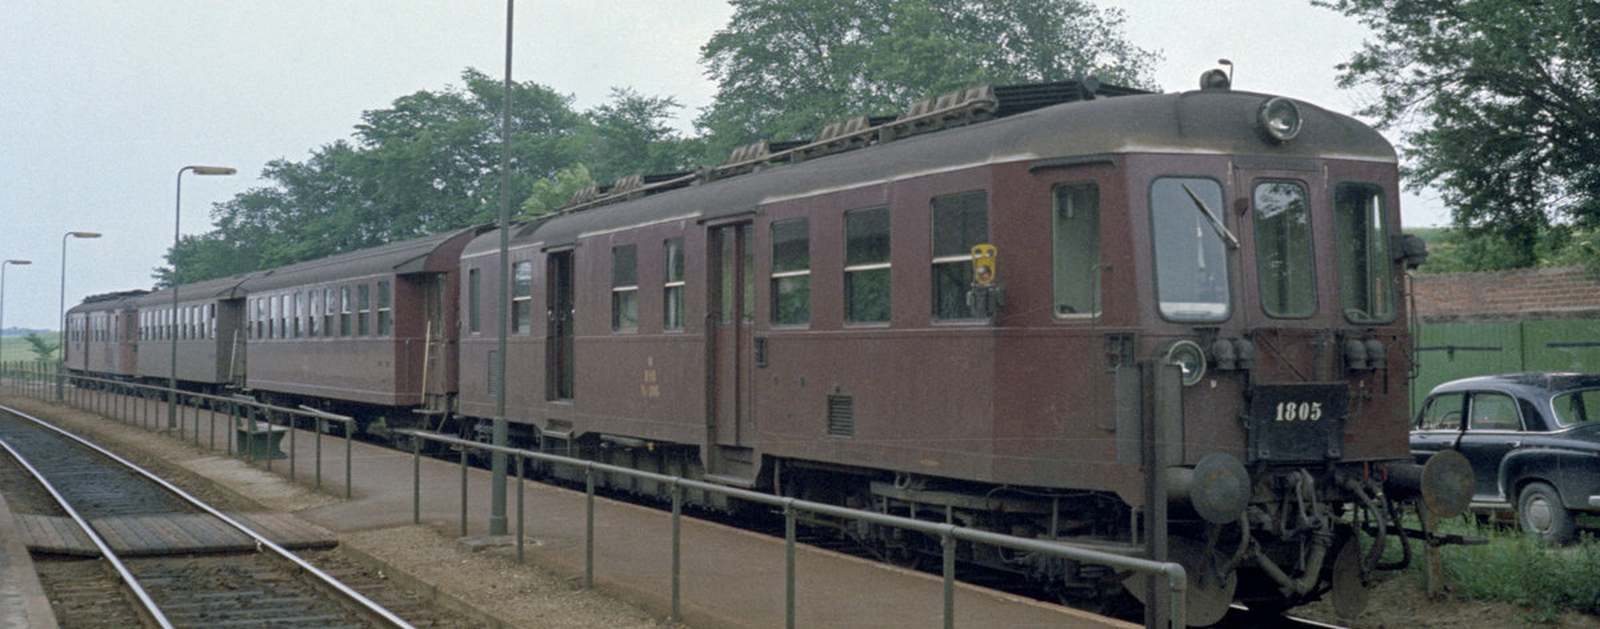 MO 1805 with two passenger carriages and a second MO in July 1970 at Veksø